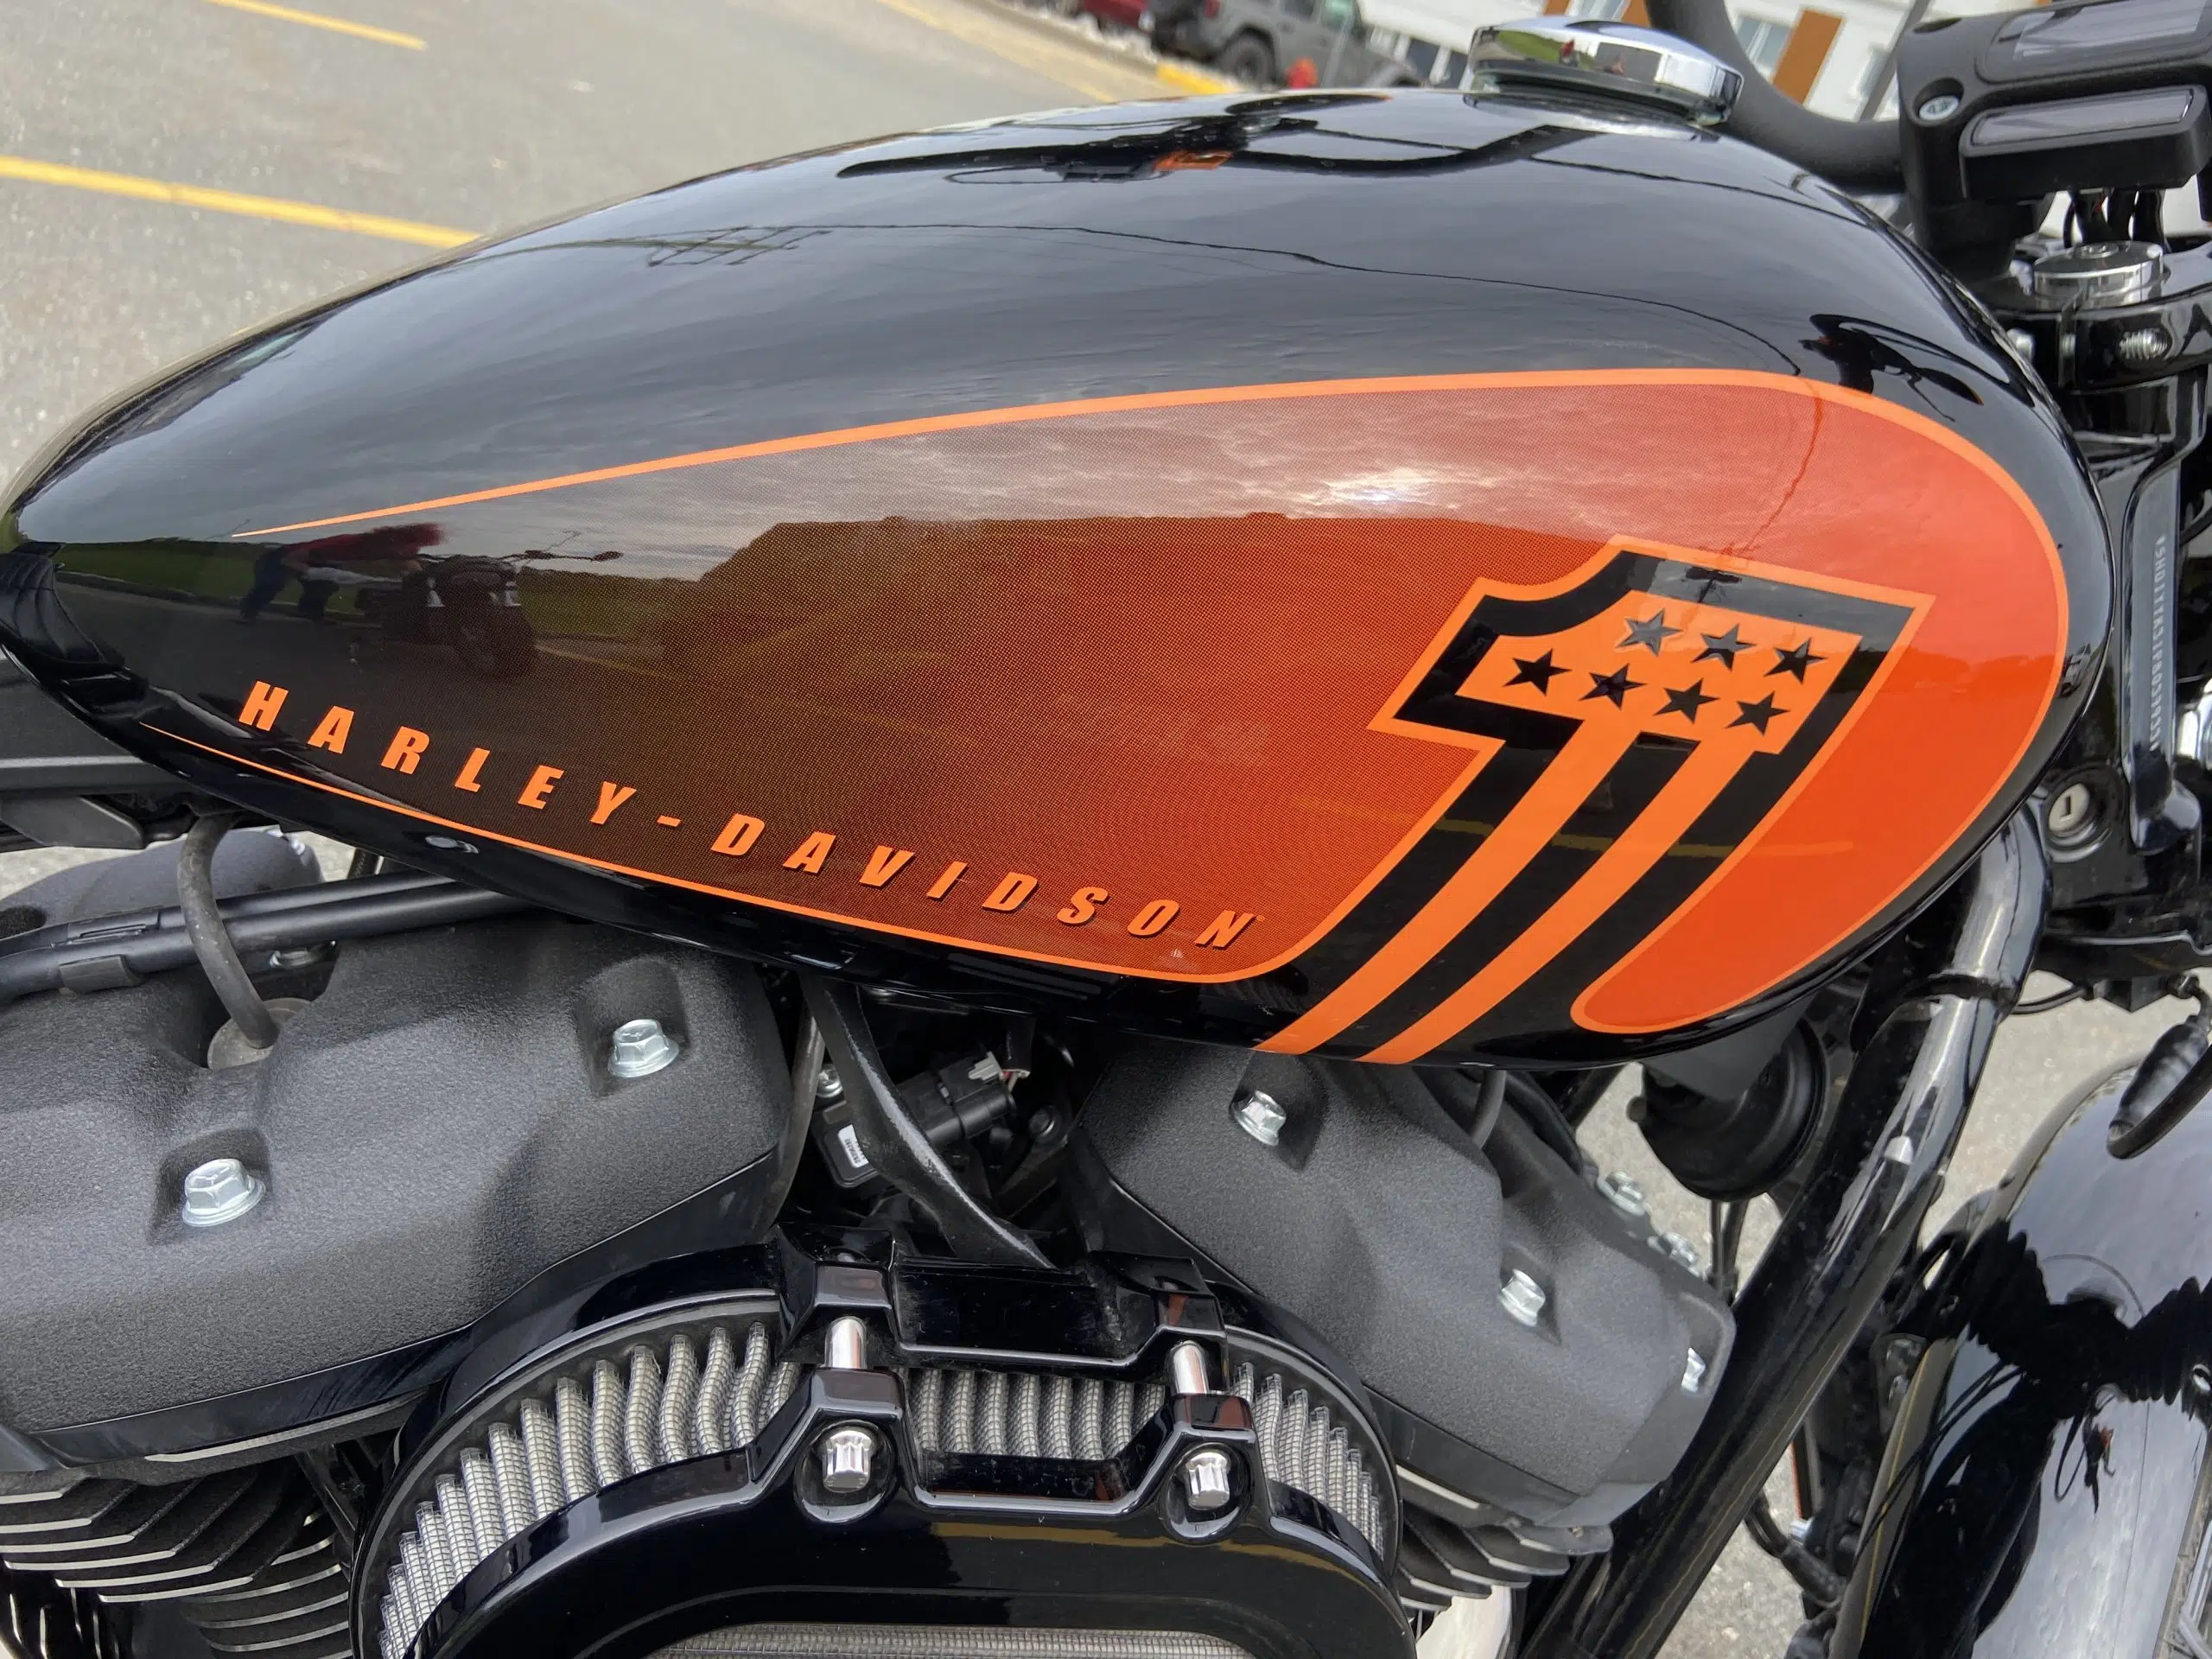 The orange patterns on the vivd black motorcycle are a reminder of the iconic Harley color